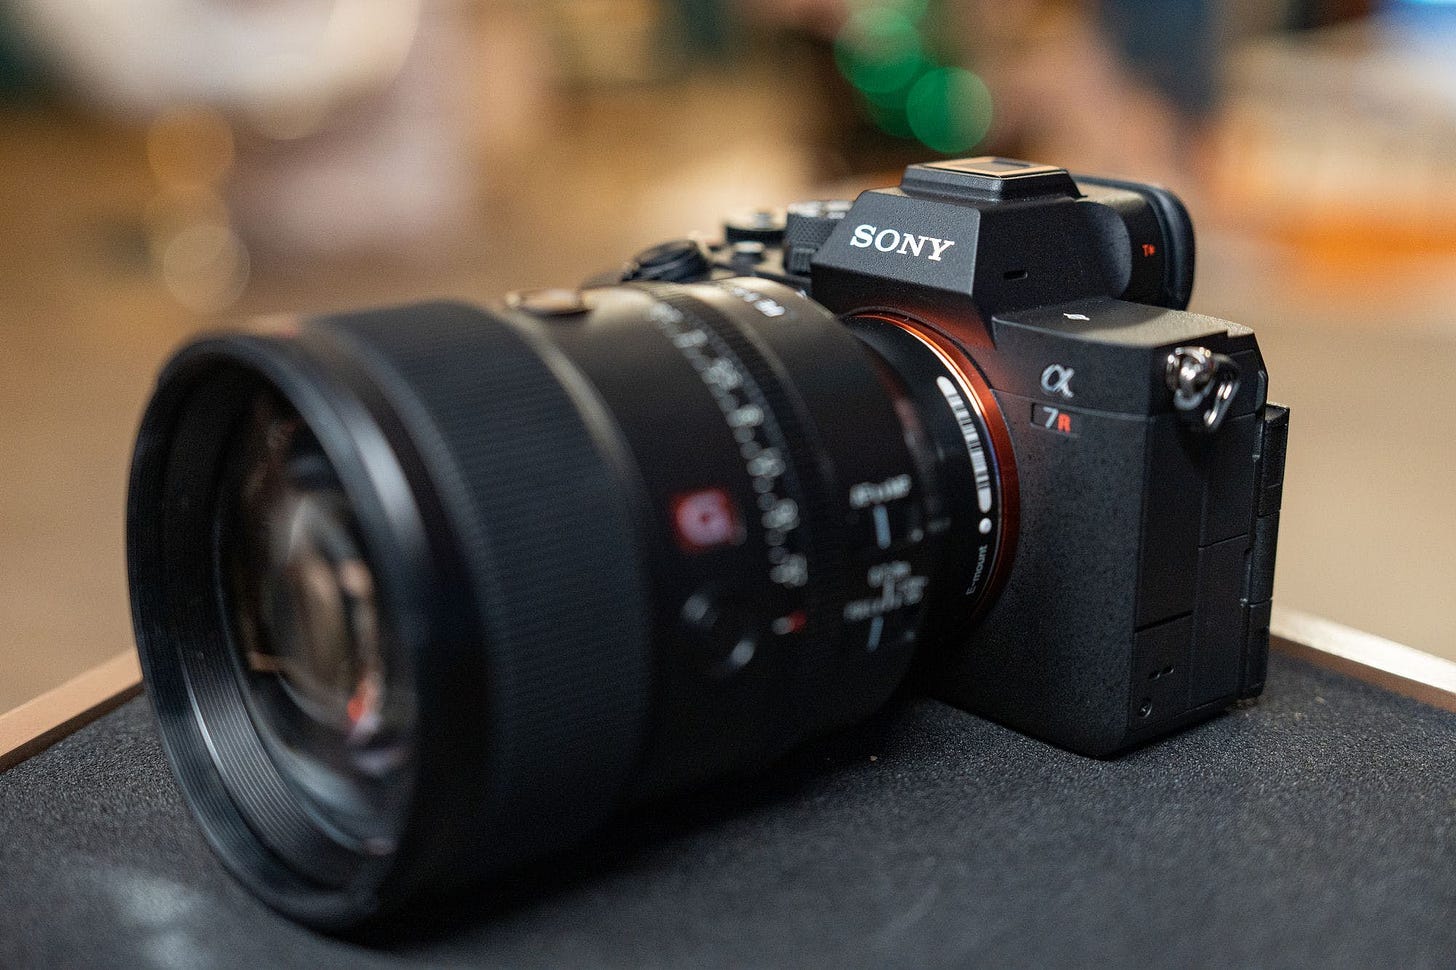 The Sony A7R V camera sitting on a counter with a lens attached to it, in front of a blurred-out background.